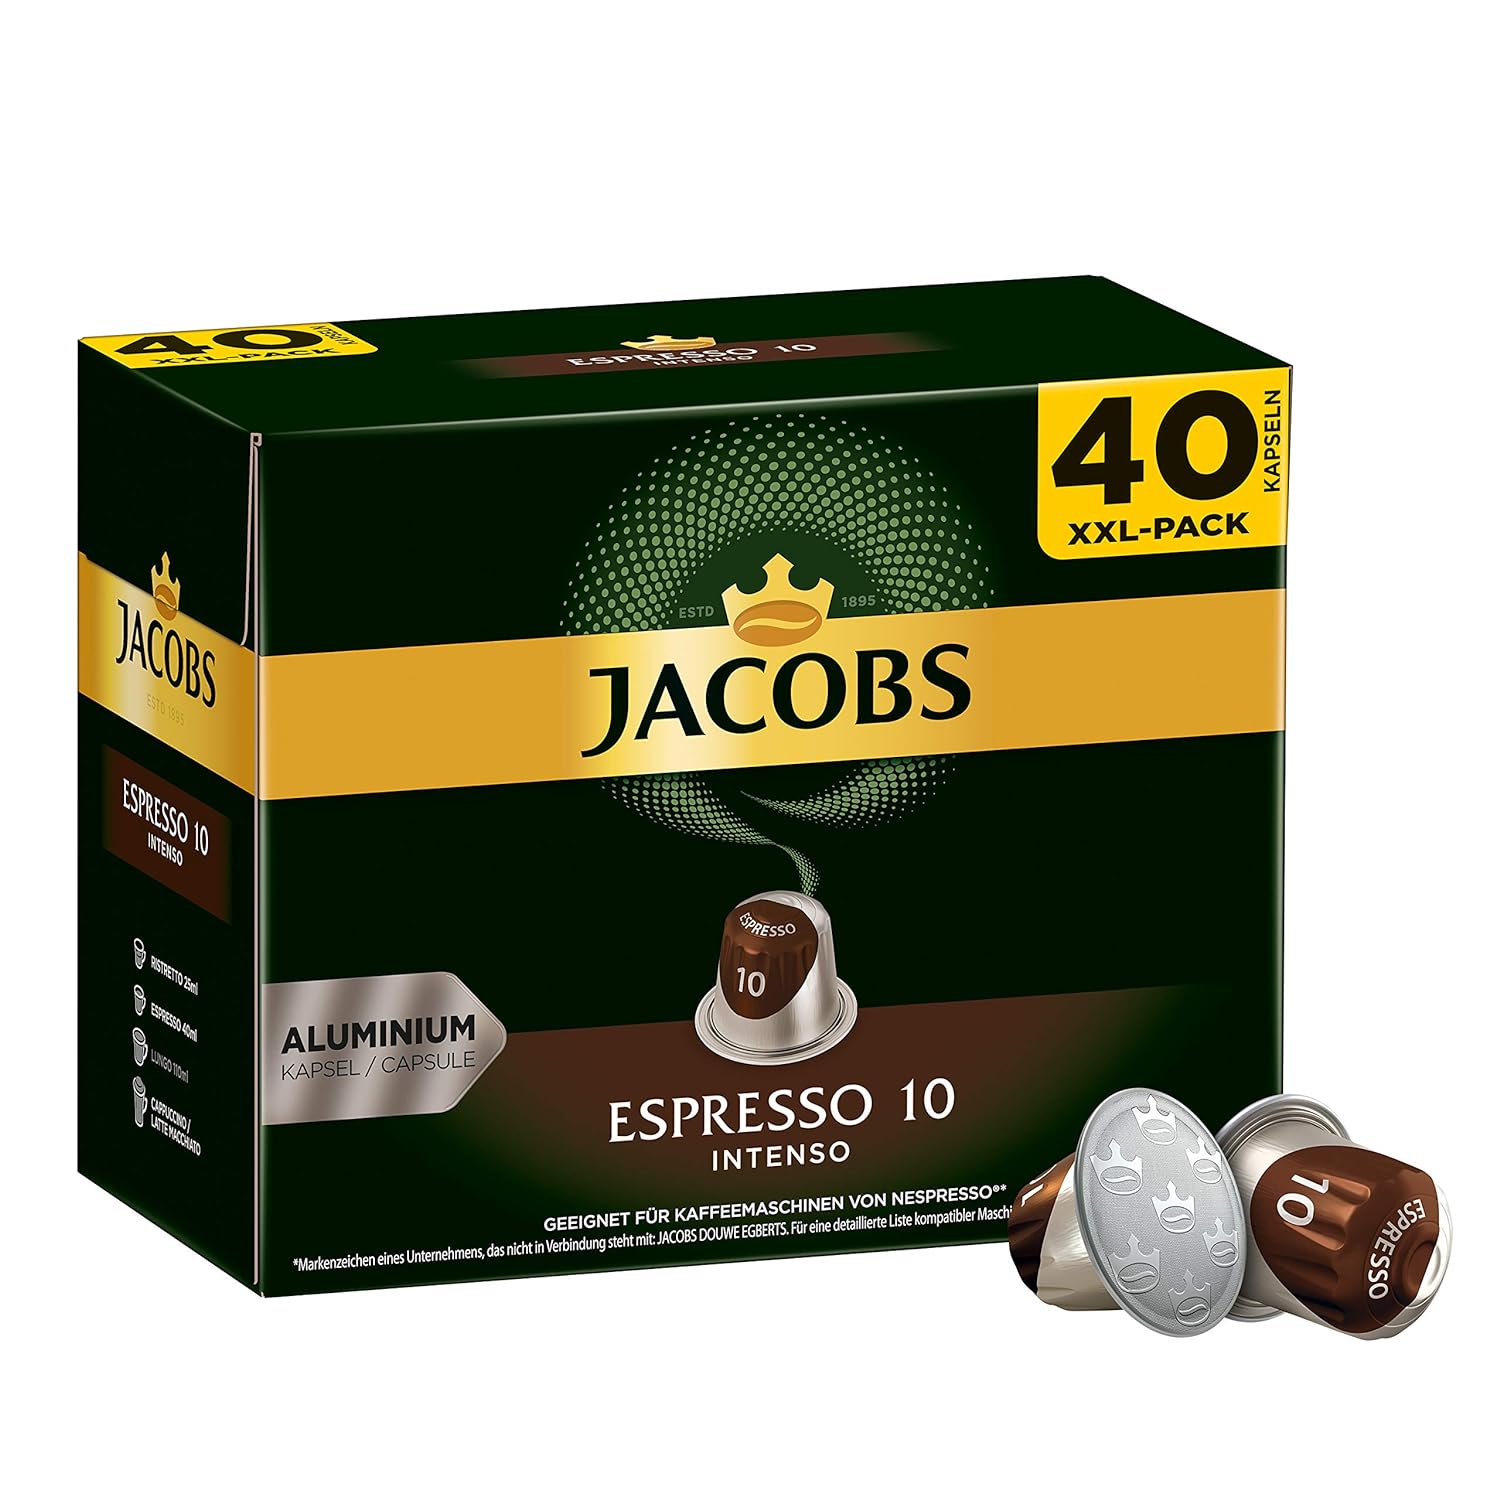 Jacobs coffee capsules espresso intense (only for a short time) megapack xxl, intensity 10 of 12, 200 nespresso compatible capsules (5 x 40 capsules)